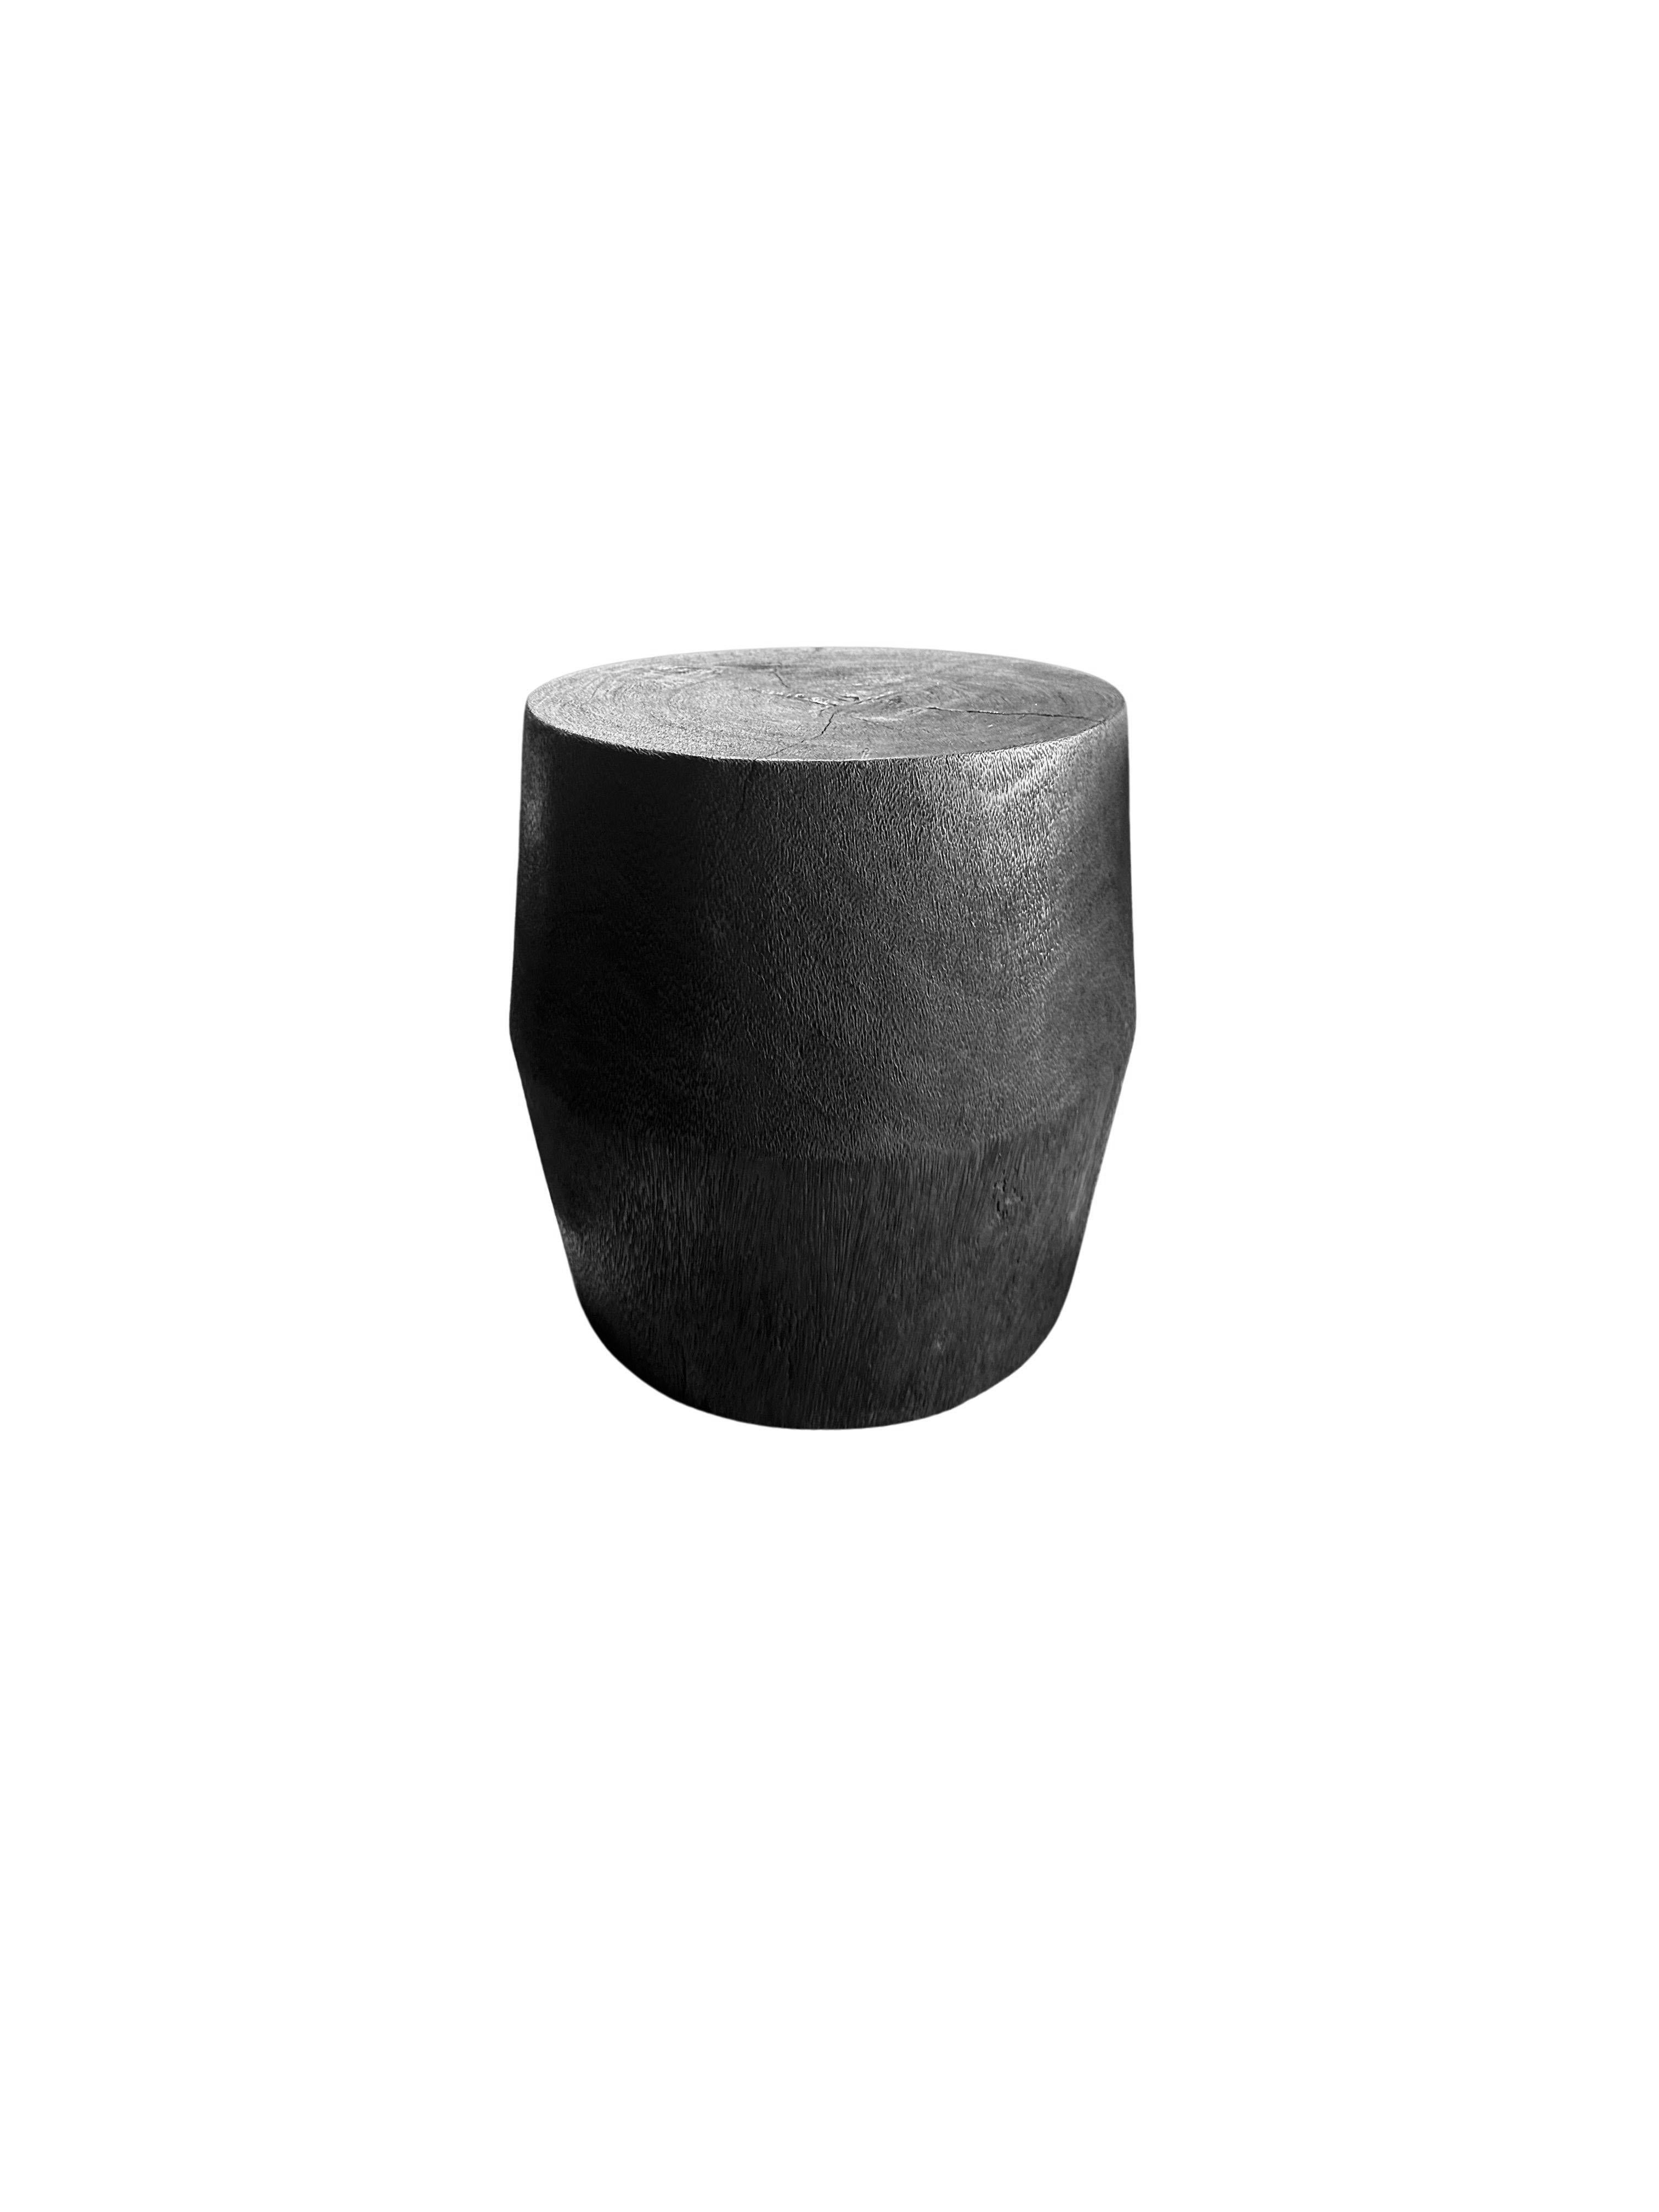 A wonderfully sculpted side table, crafted from a single block of mango wood. It features wonderful wood textures. To achieve its dark black pigment the wood was burnt numerous times and finished with a clear coat. 

